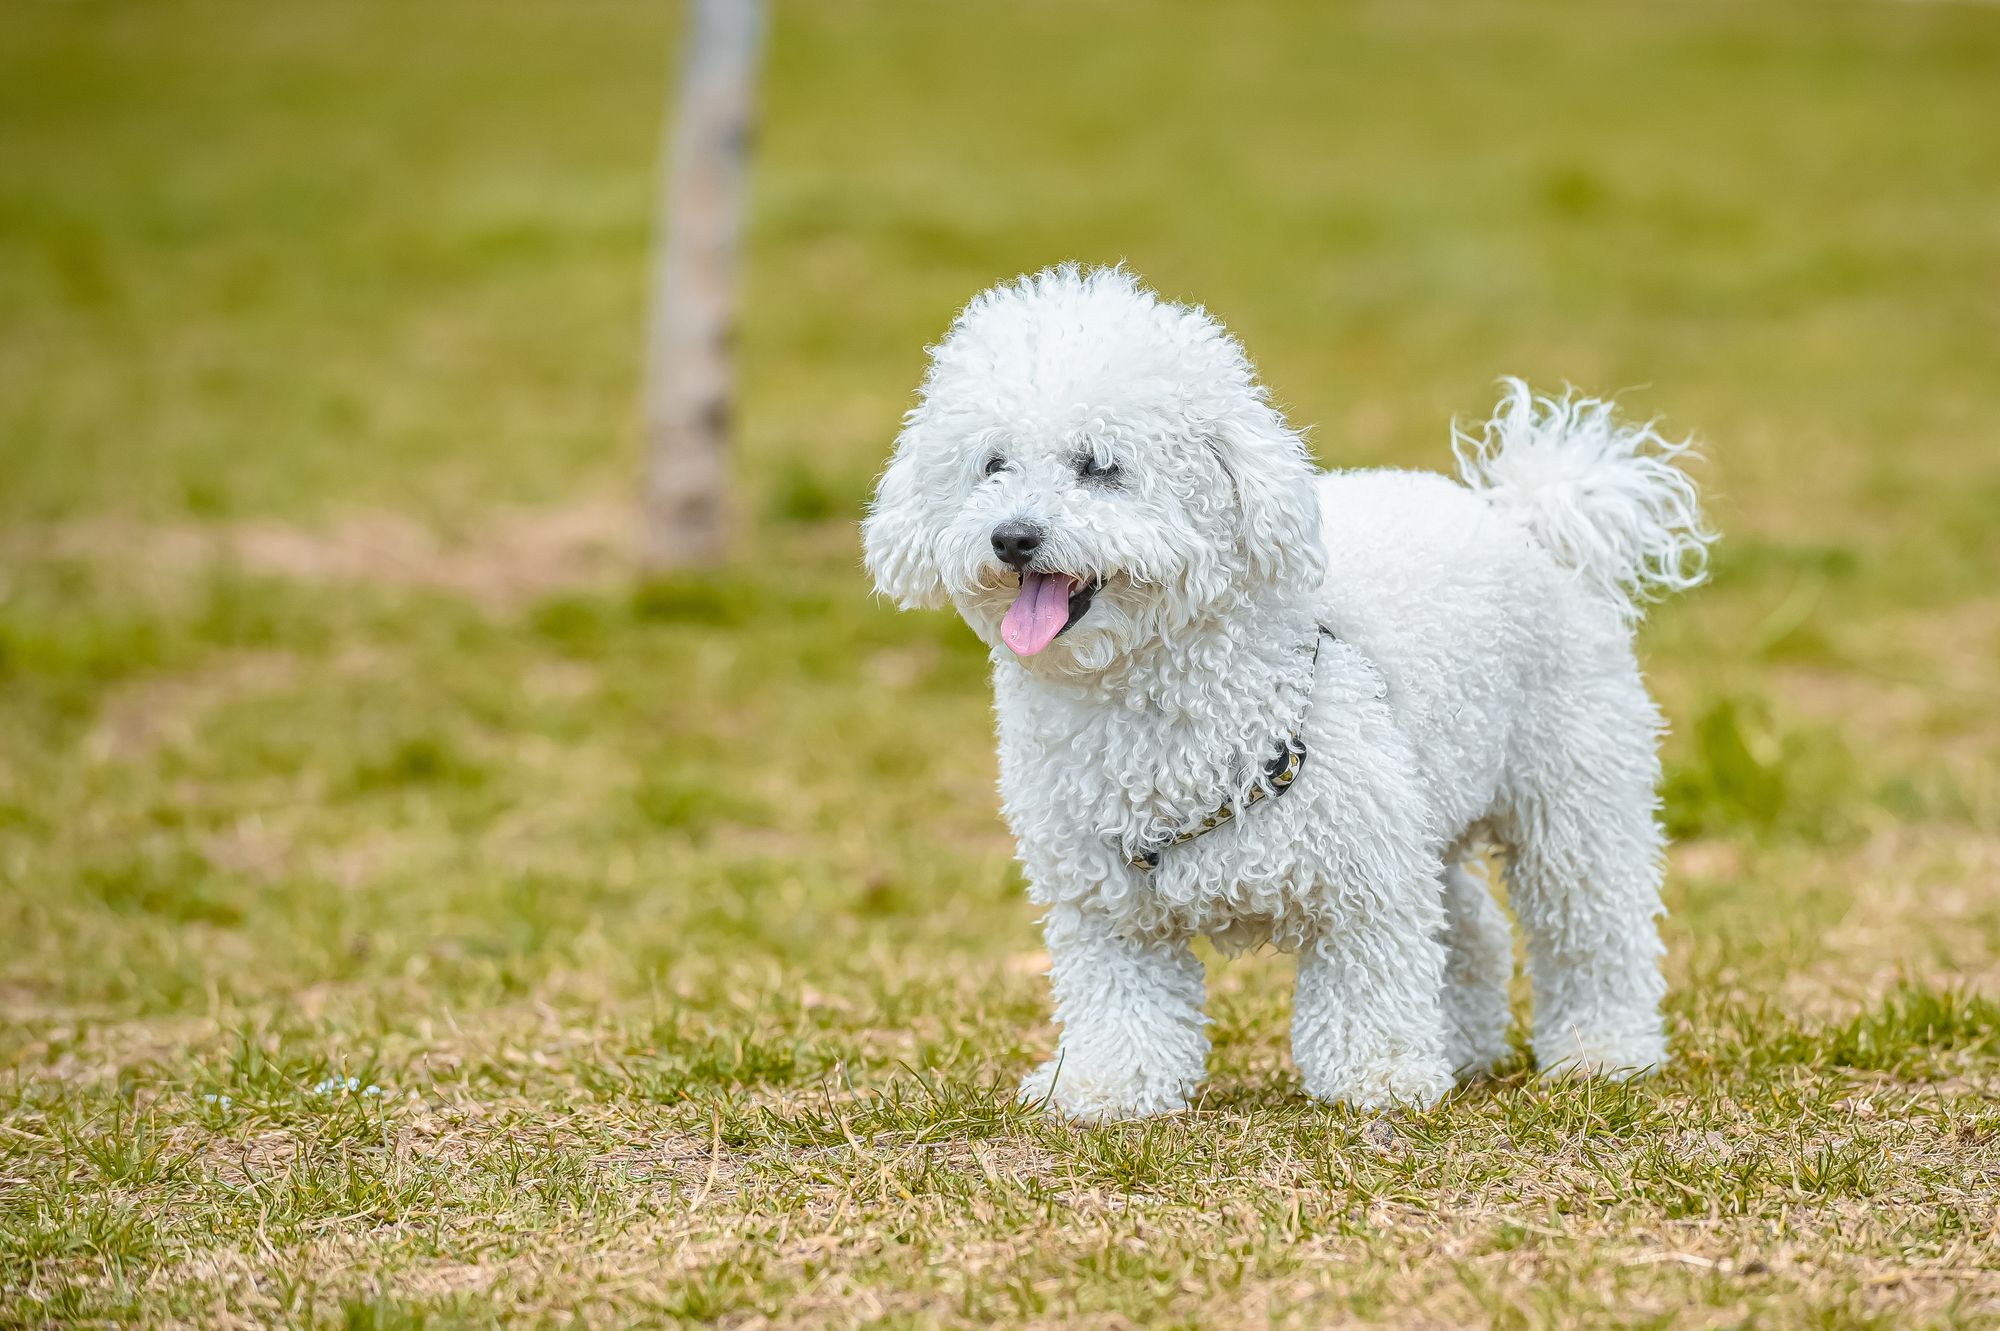 8 Best White Curly-Haired Dog Breeds: From Small to Large